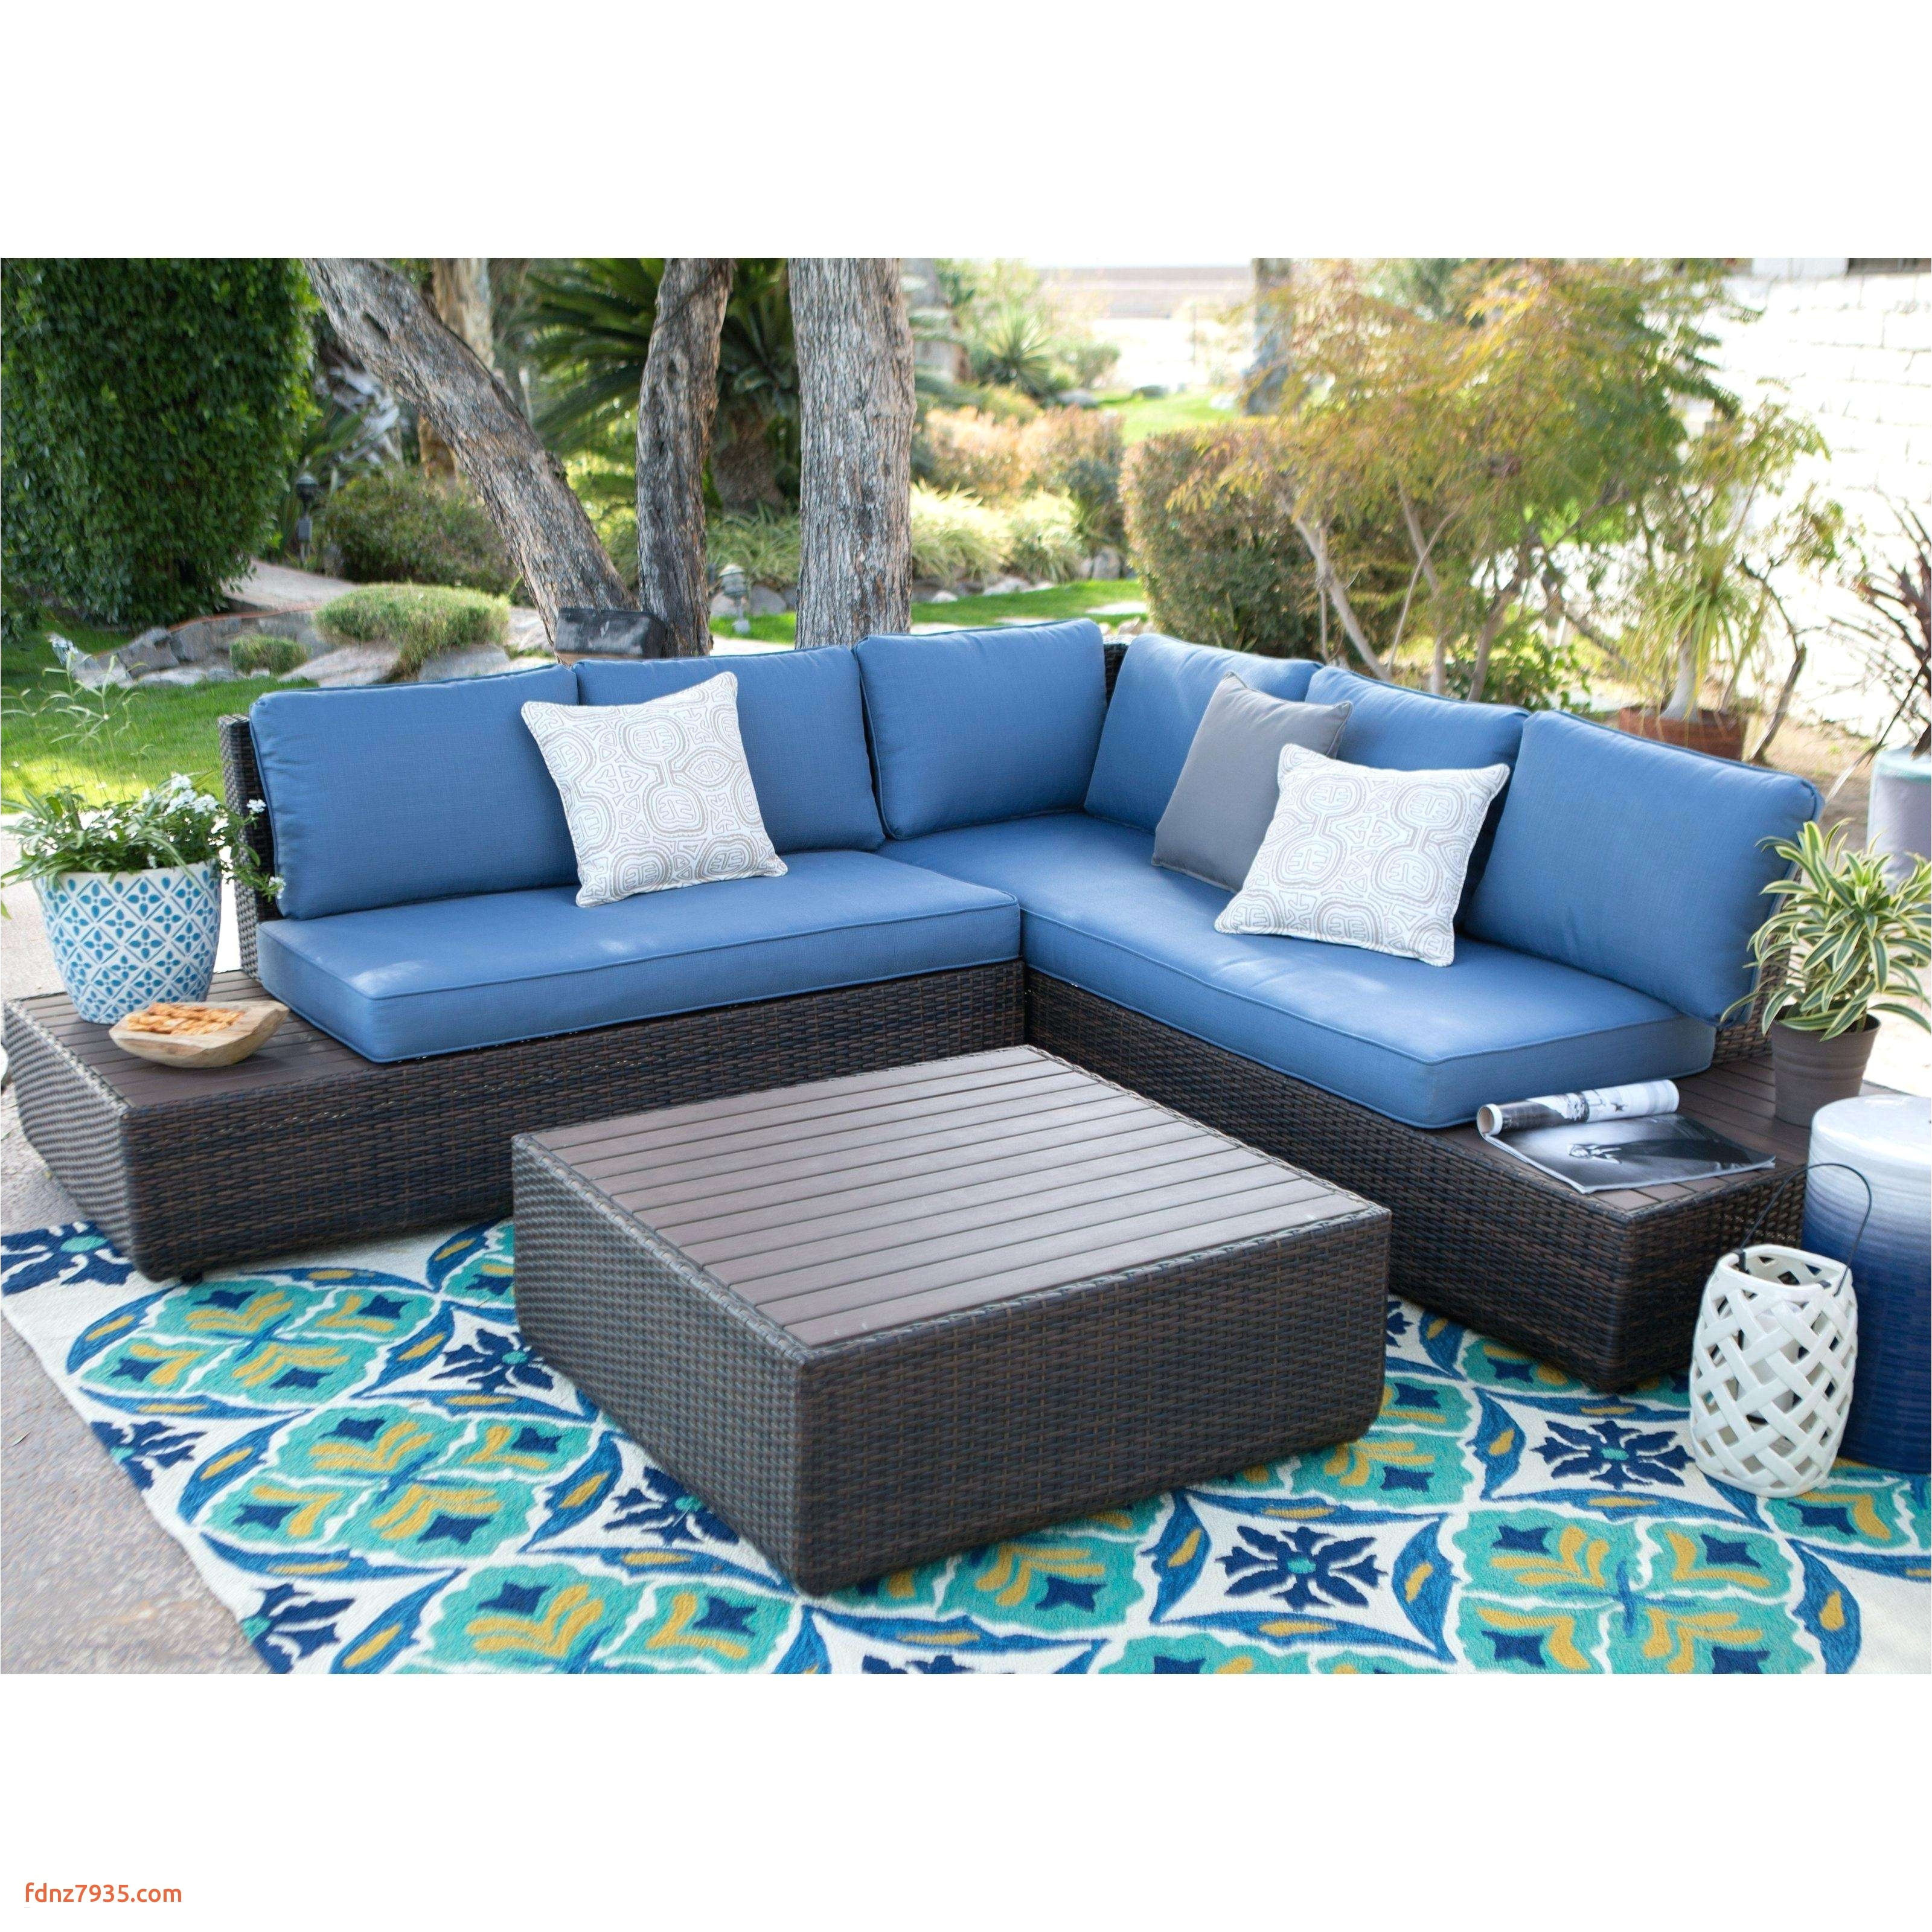 outdoor patio furniture cushions best wicker outdoor sofa 0d patio chairs sale replacement cushions design